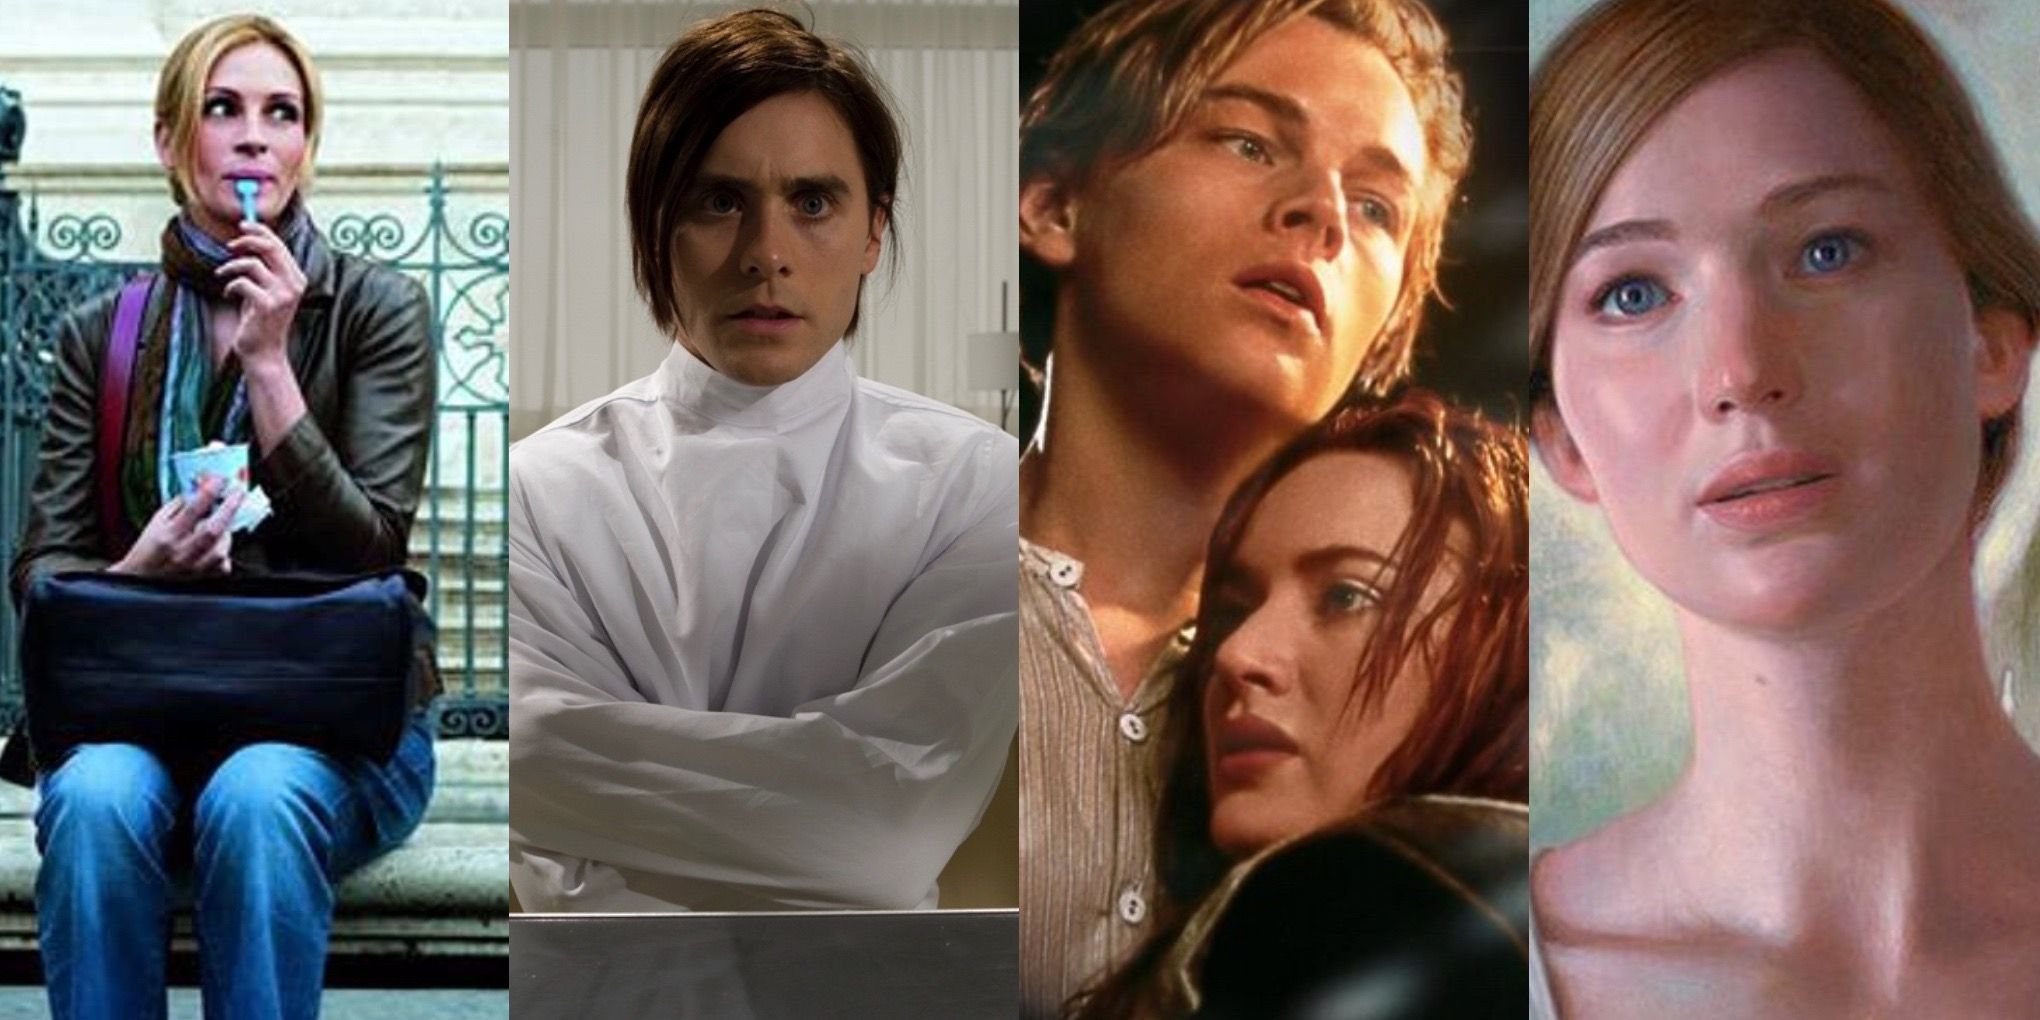 Stills from Eat Pray Love, Mr. Nobody, Titanic and mother!